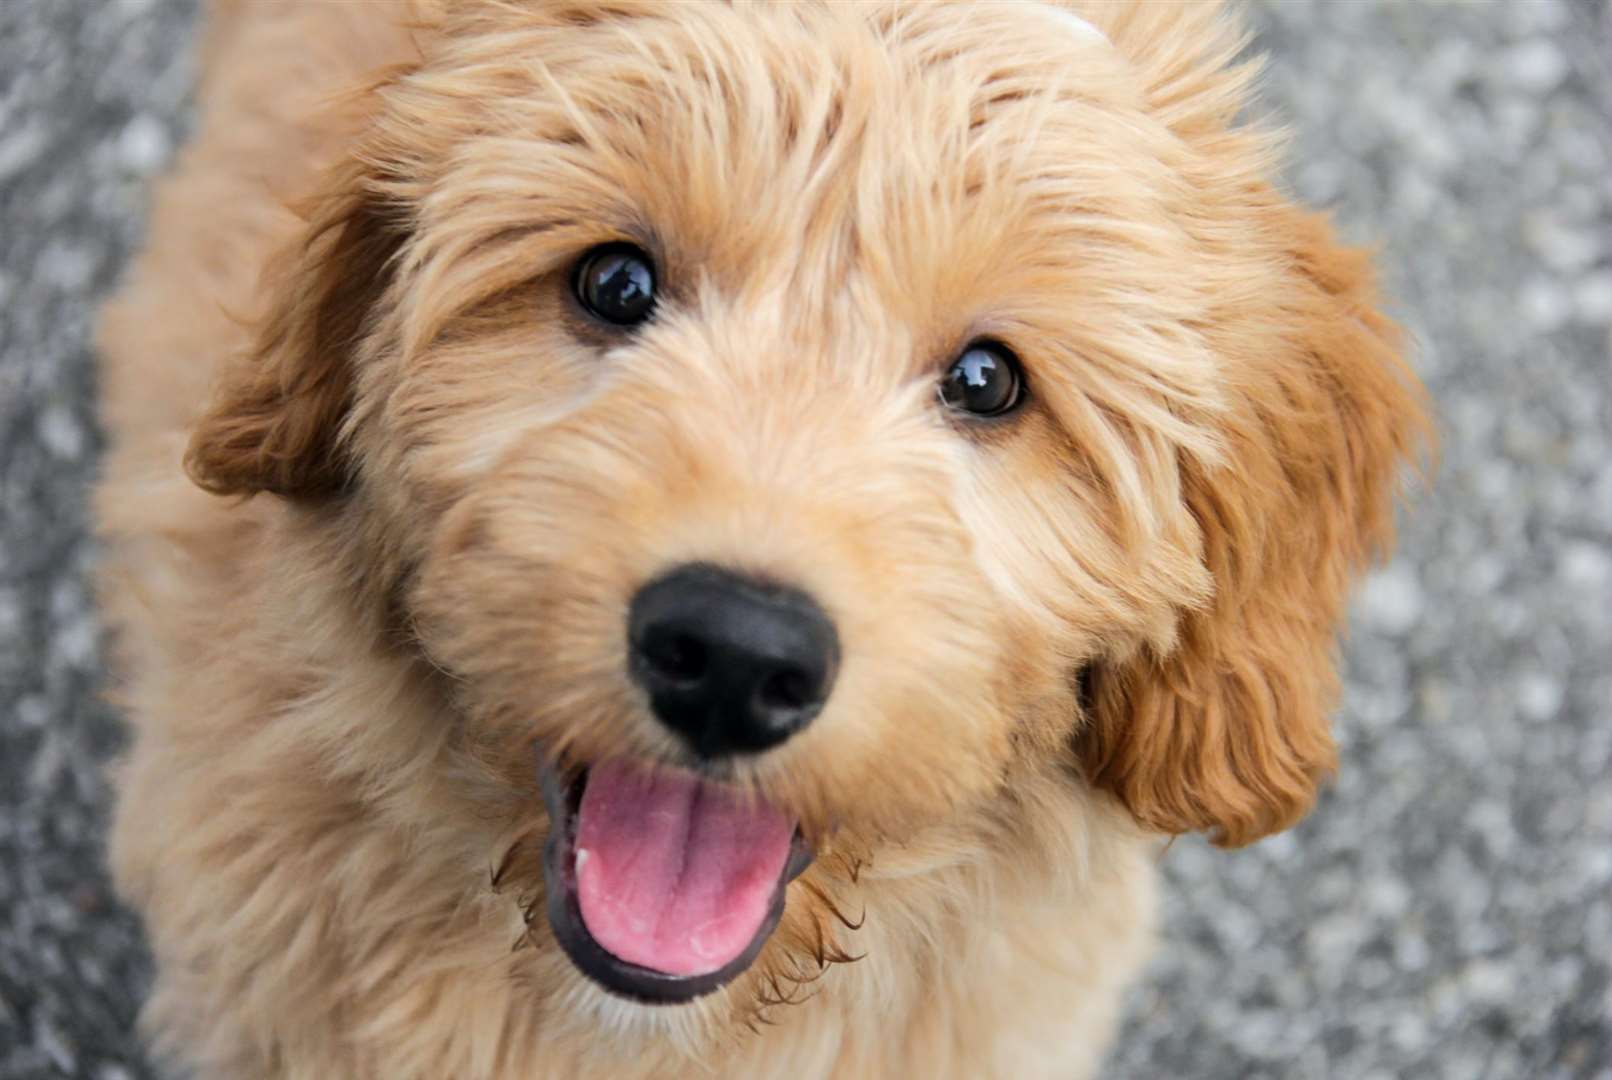 Have you asked to see the puppy’s parents? Image: iStock.